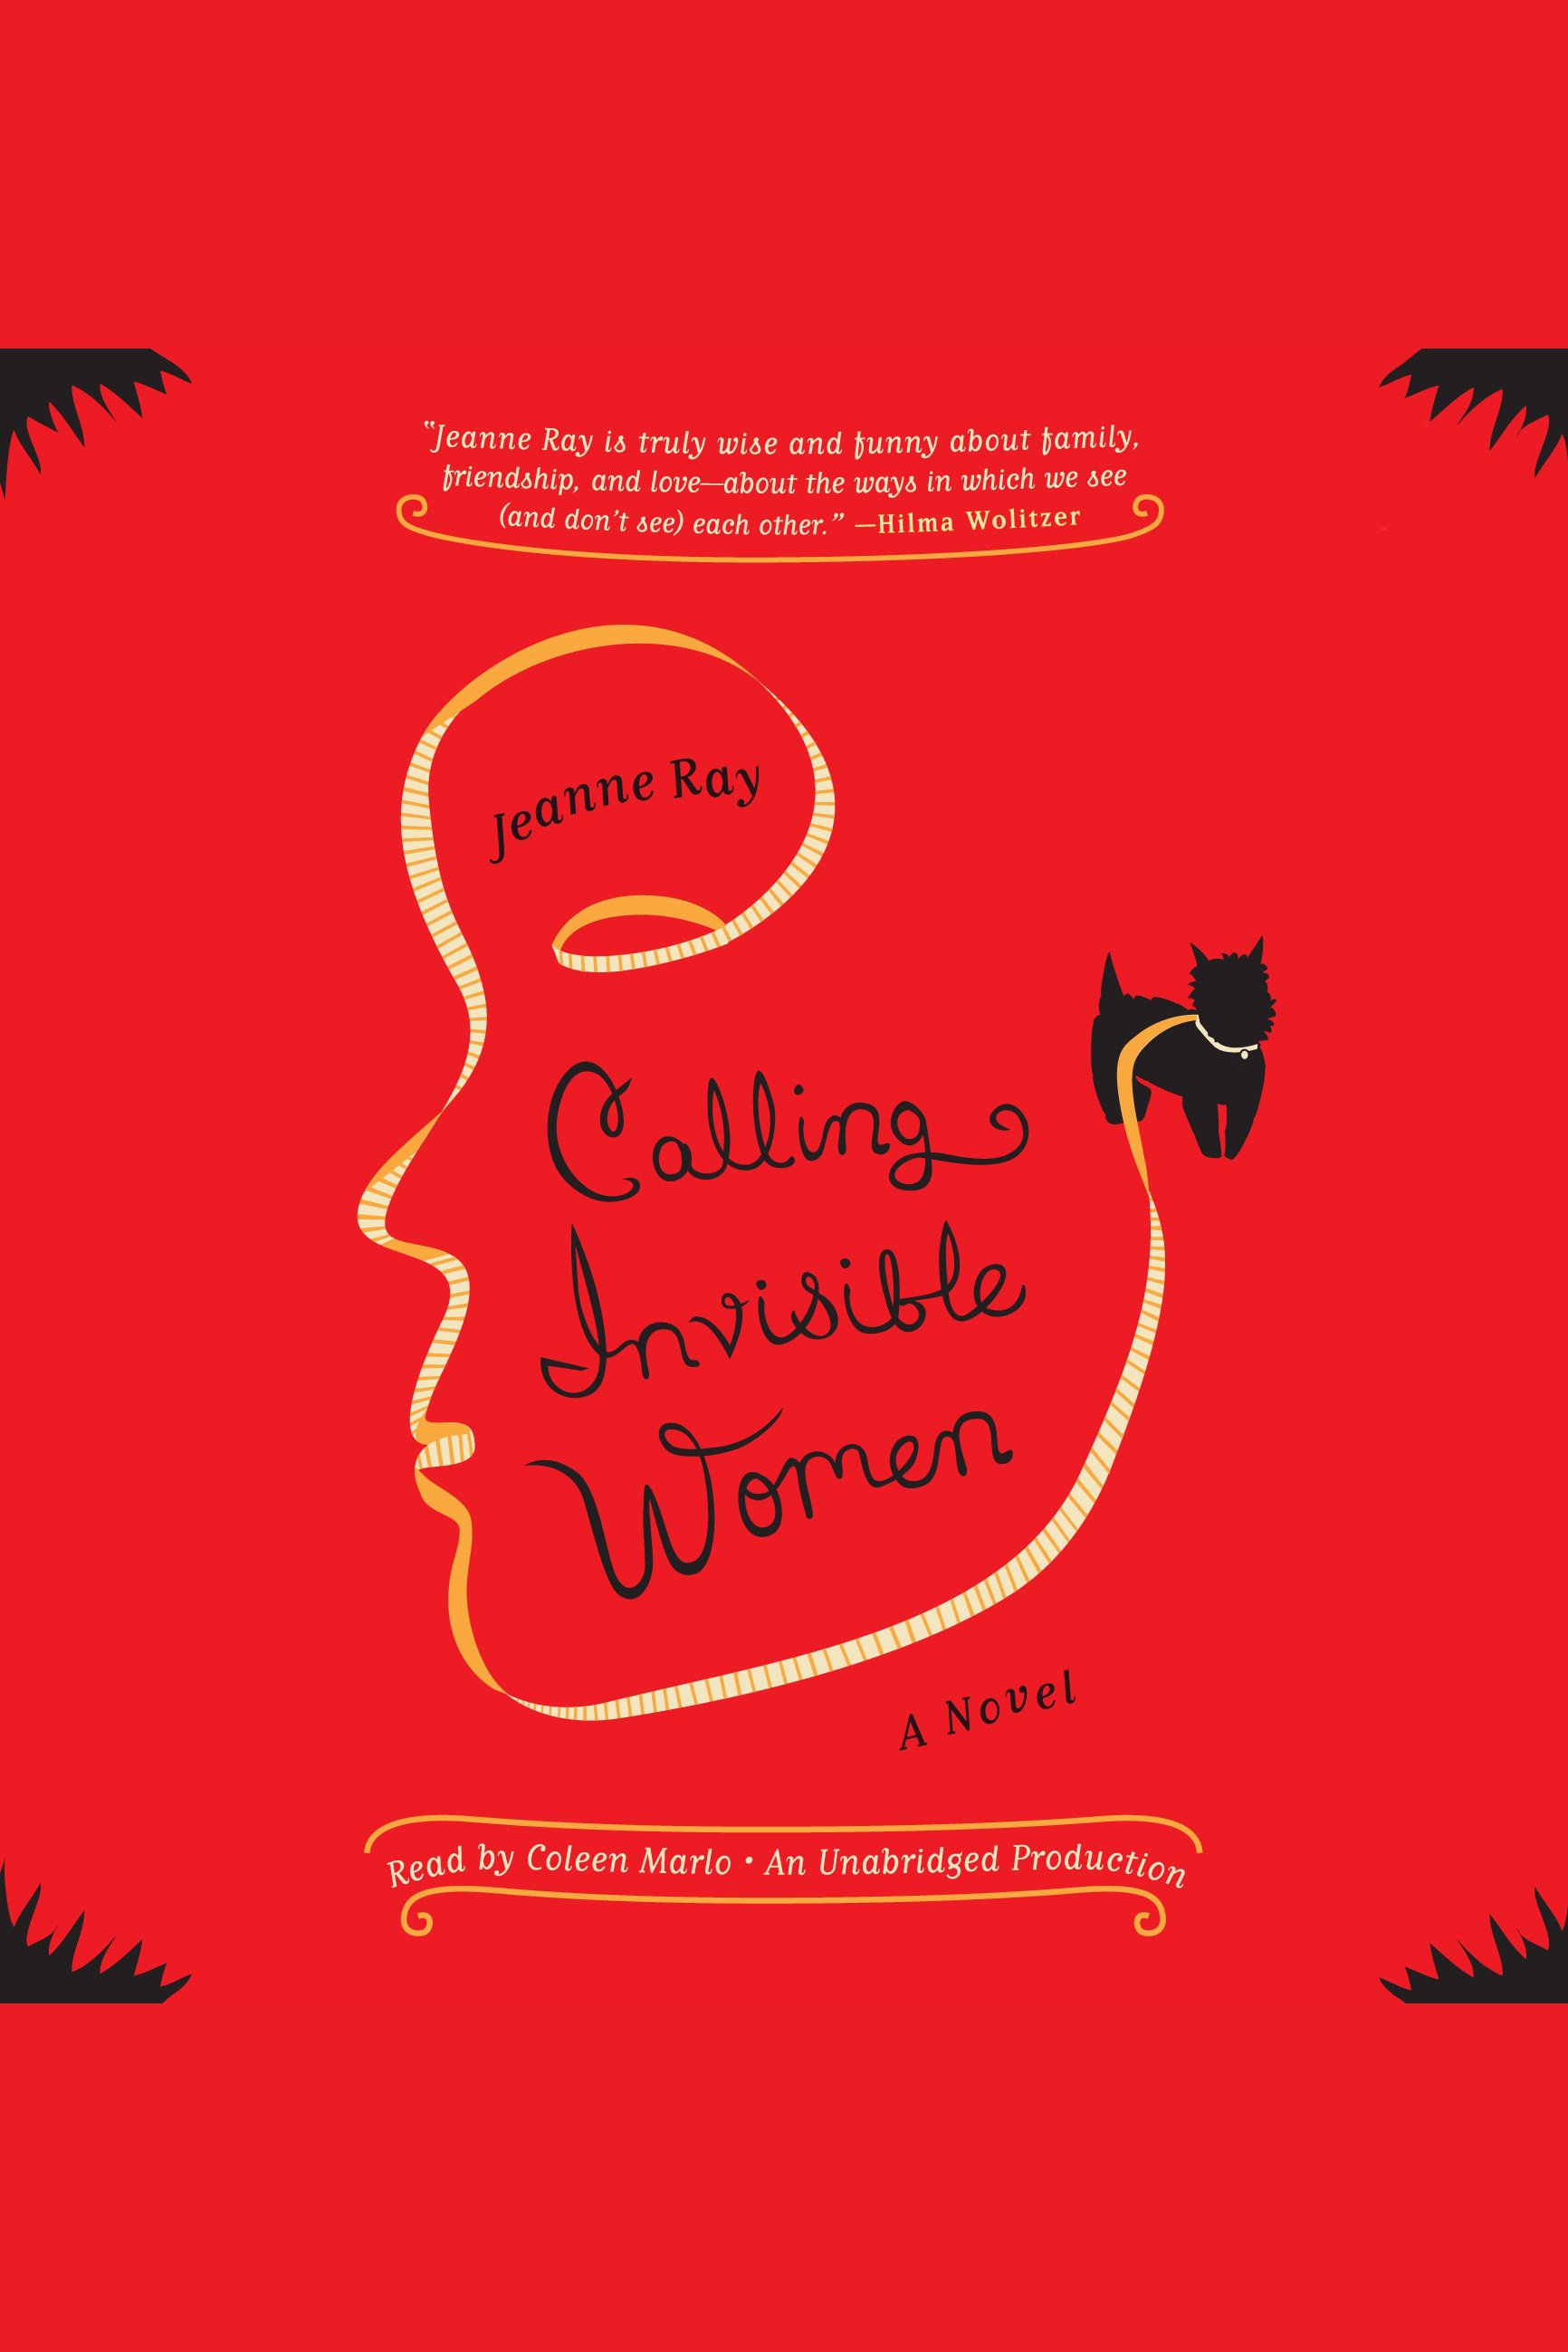 Calling invisible women cover image